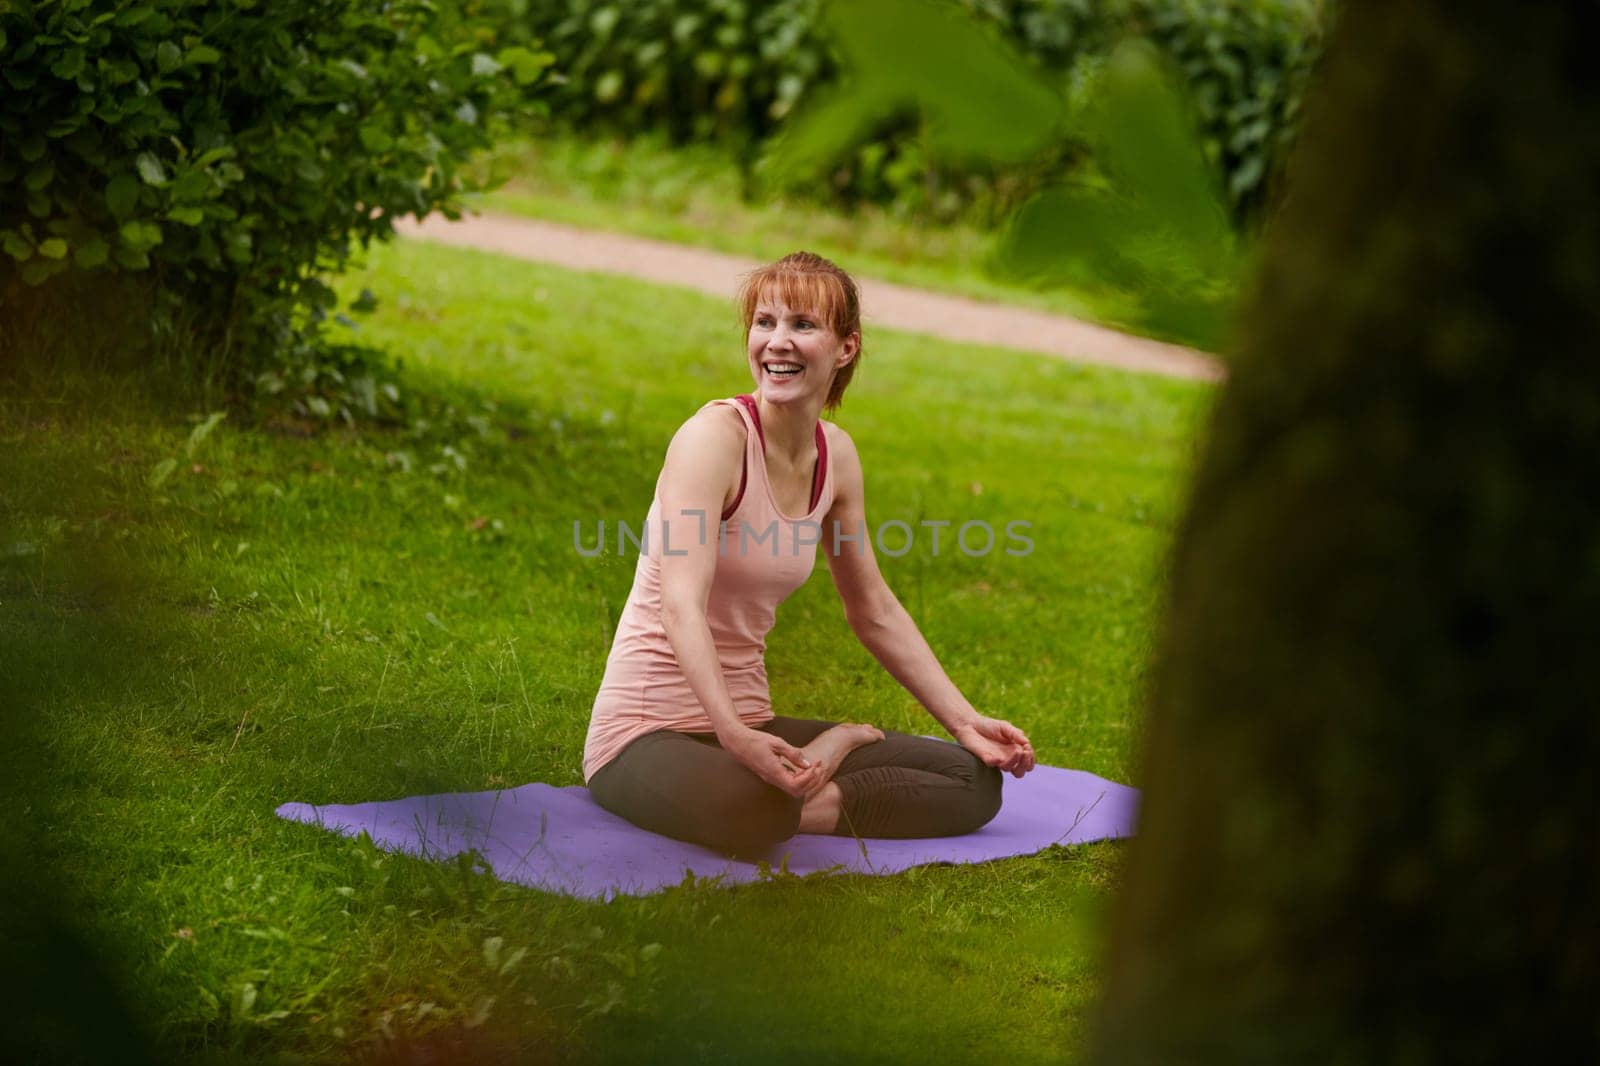 Yoga keeps her happy and healthy. a woman doing yoga in the park